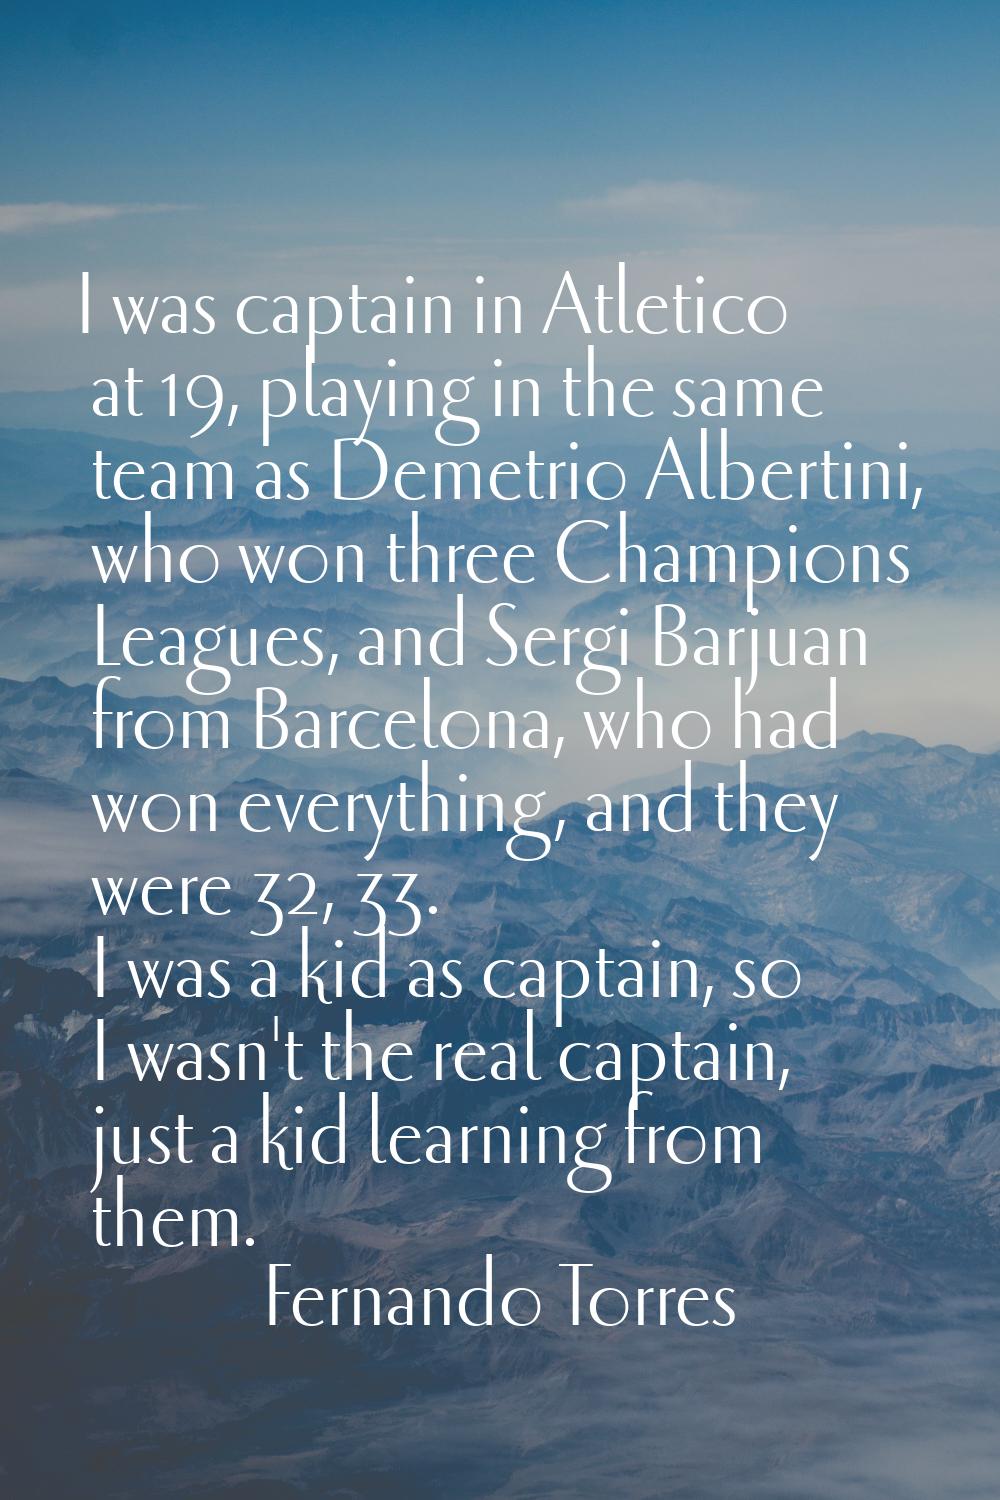 I was captain in Atletico at 19, playing in the same team as Demetrio Albertini, who won three Cham